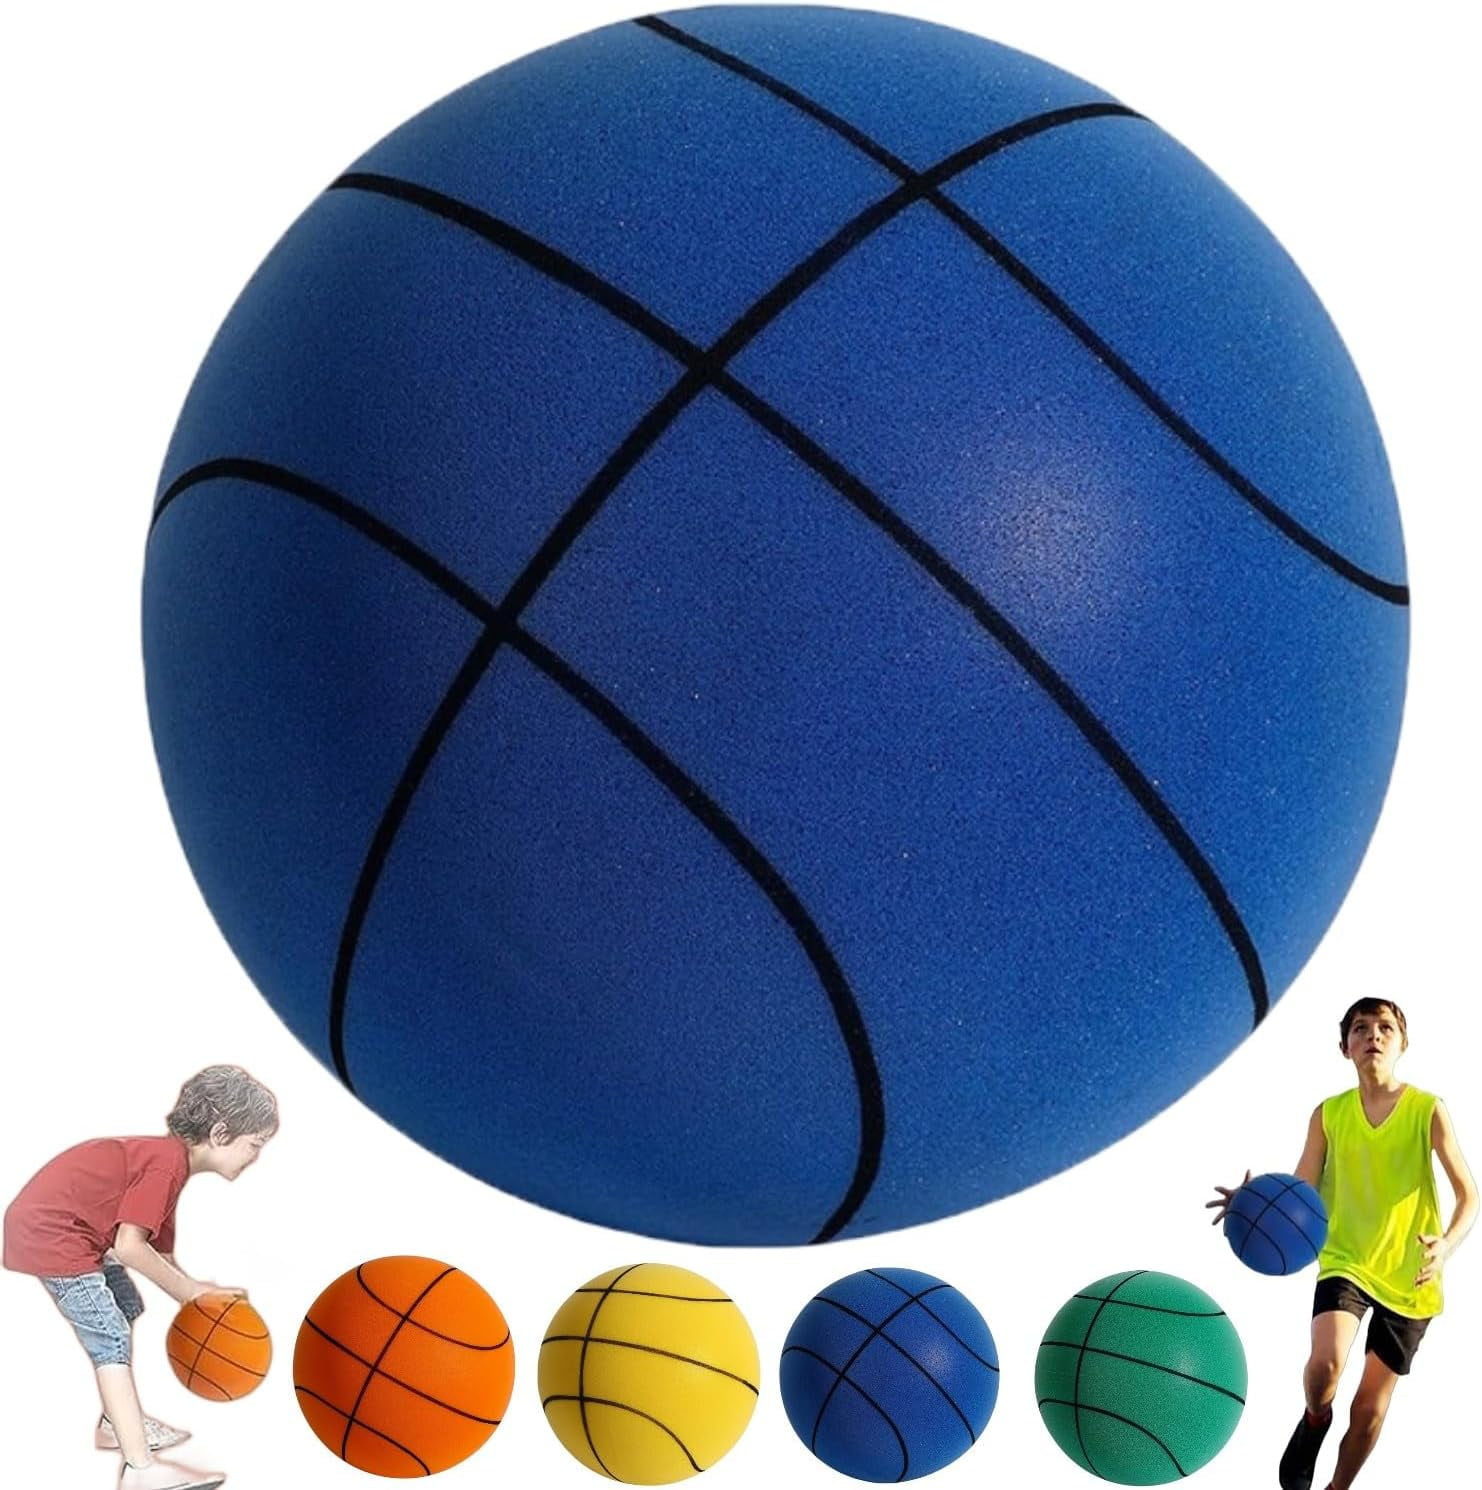  Limecute Silent Ball Basketball Indoor Training Quiet Ball  Soft Foam Ball Highly Elastic in The Lab Silent Basketball (Orange,  Diameter 7.0 inches) : Sports & Outdoors